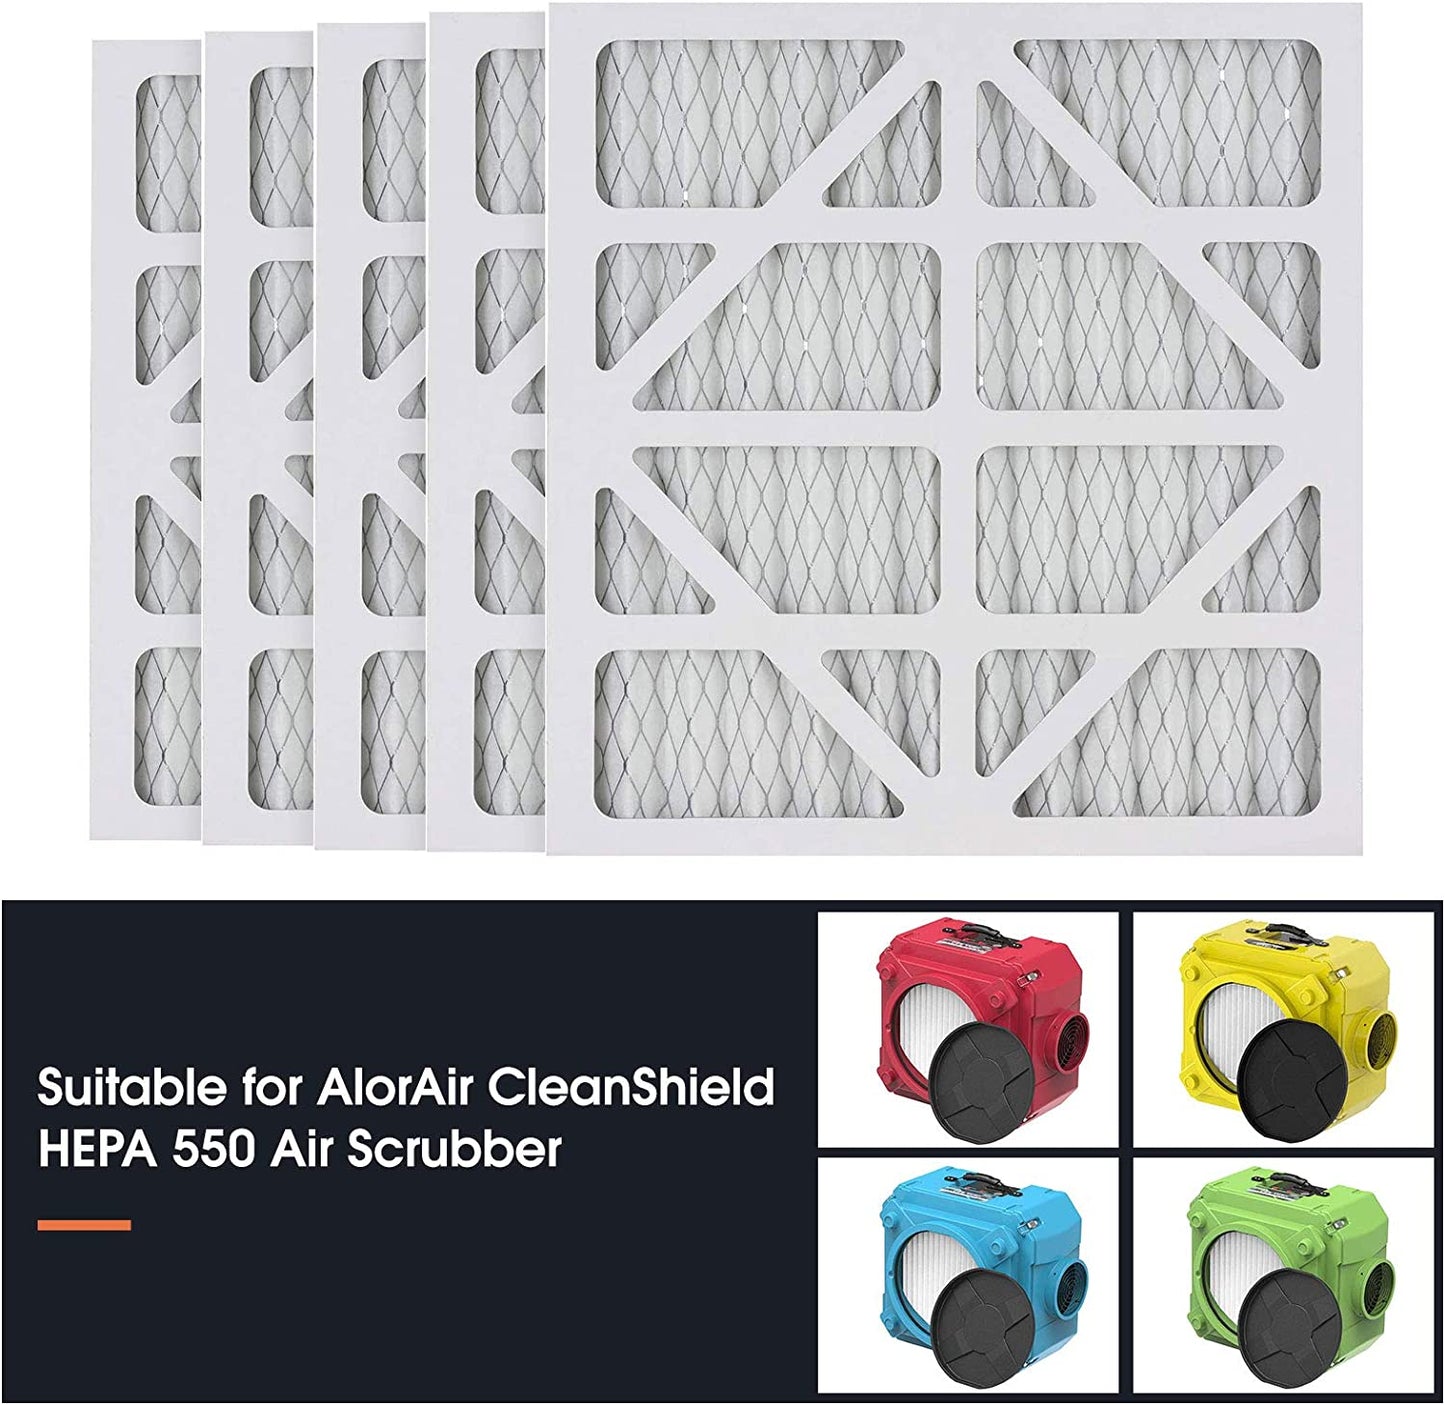 AlorAir® MERV-10 Filter 5-Pack Replacement Set for Cleanshield Hepa 550 Air Scrubber